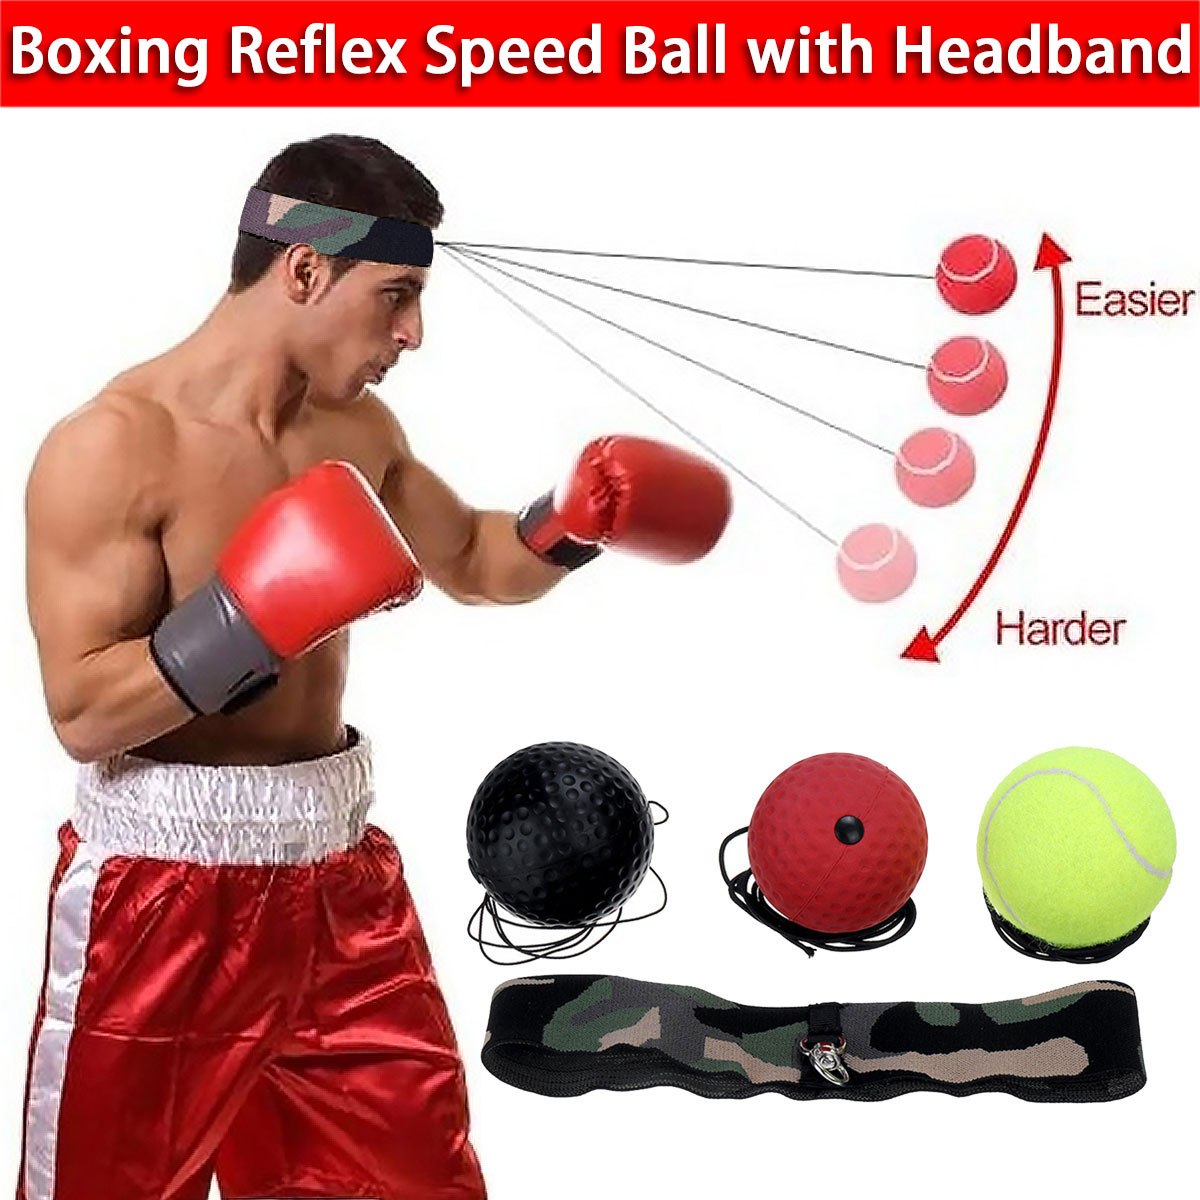 Boxing Punch Exercise Fight Ball With Head Band For Reflex Speed Training Box hi 